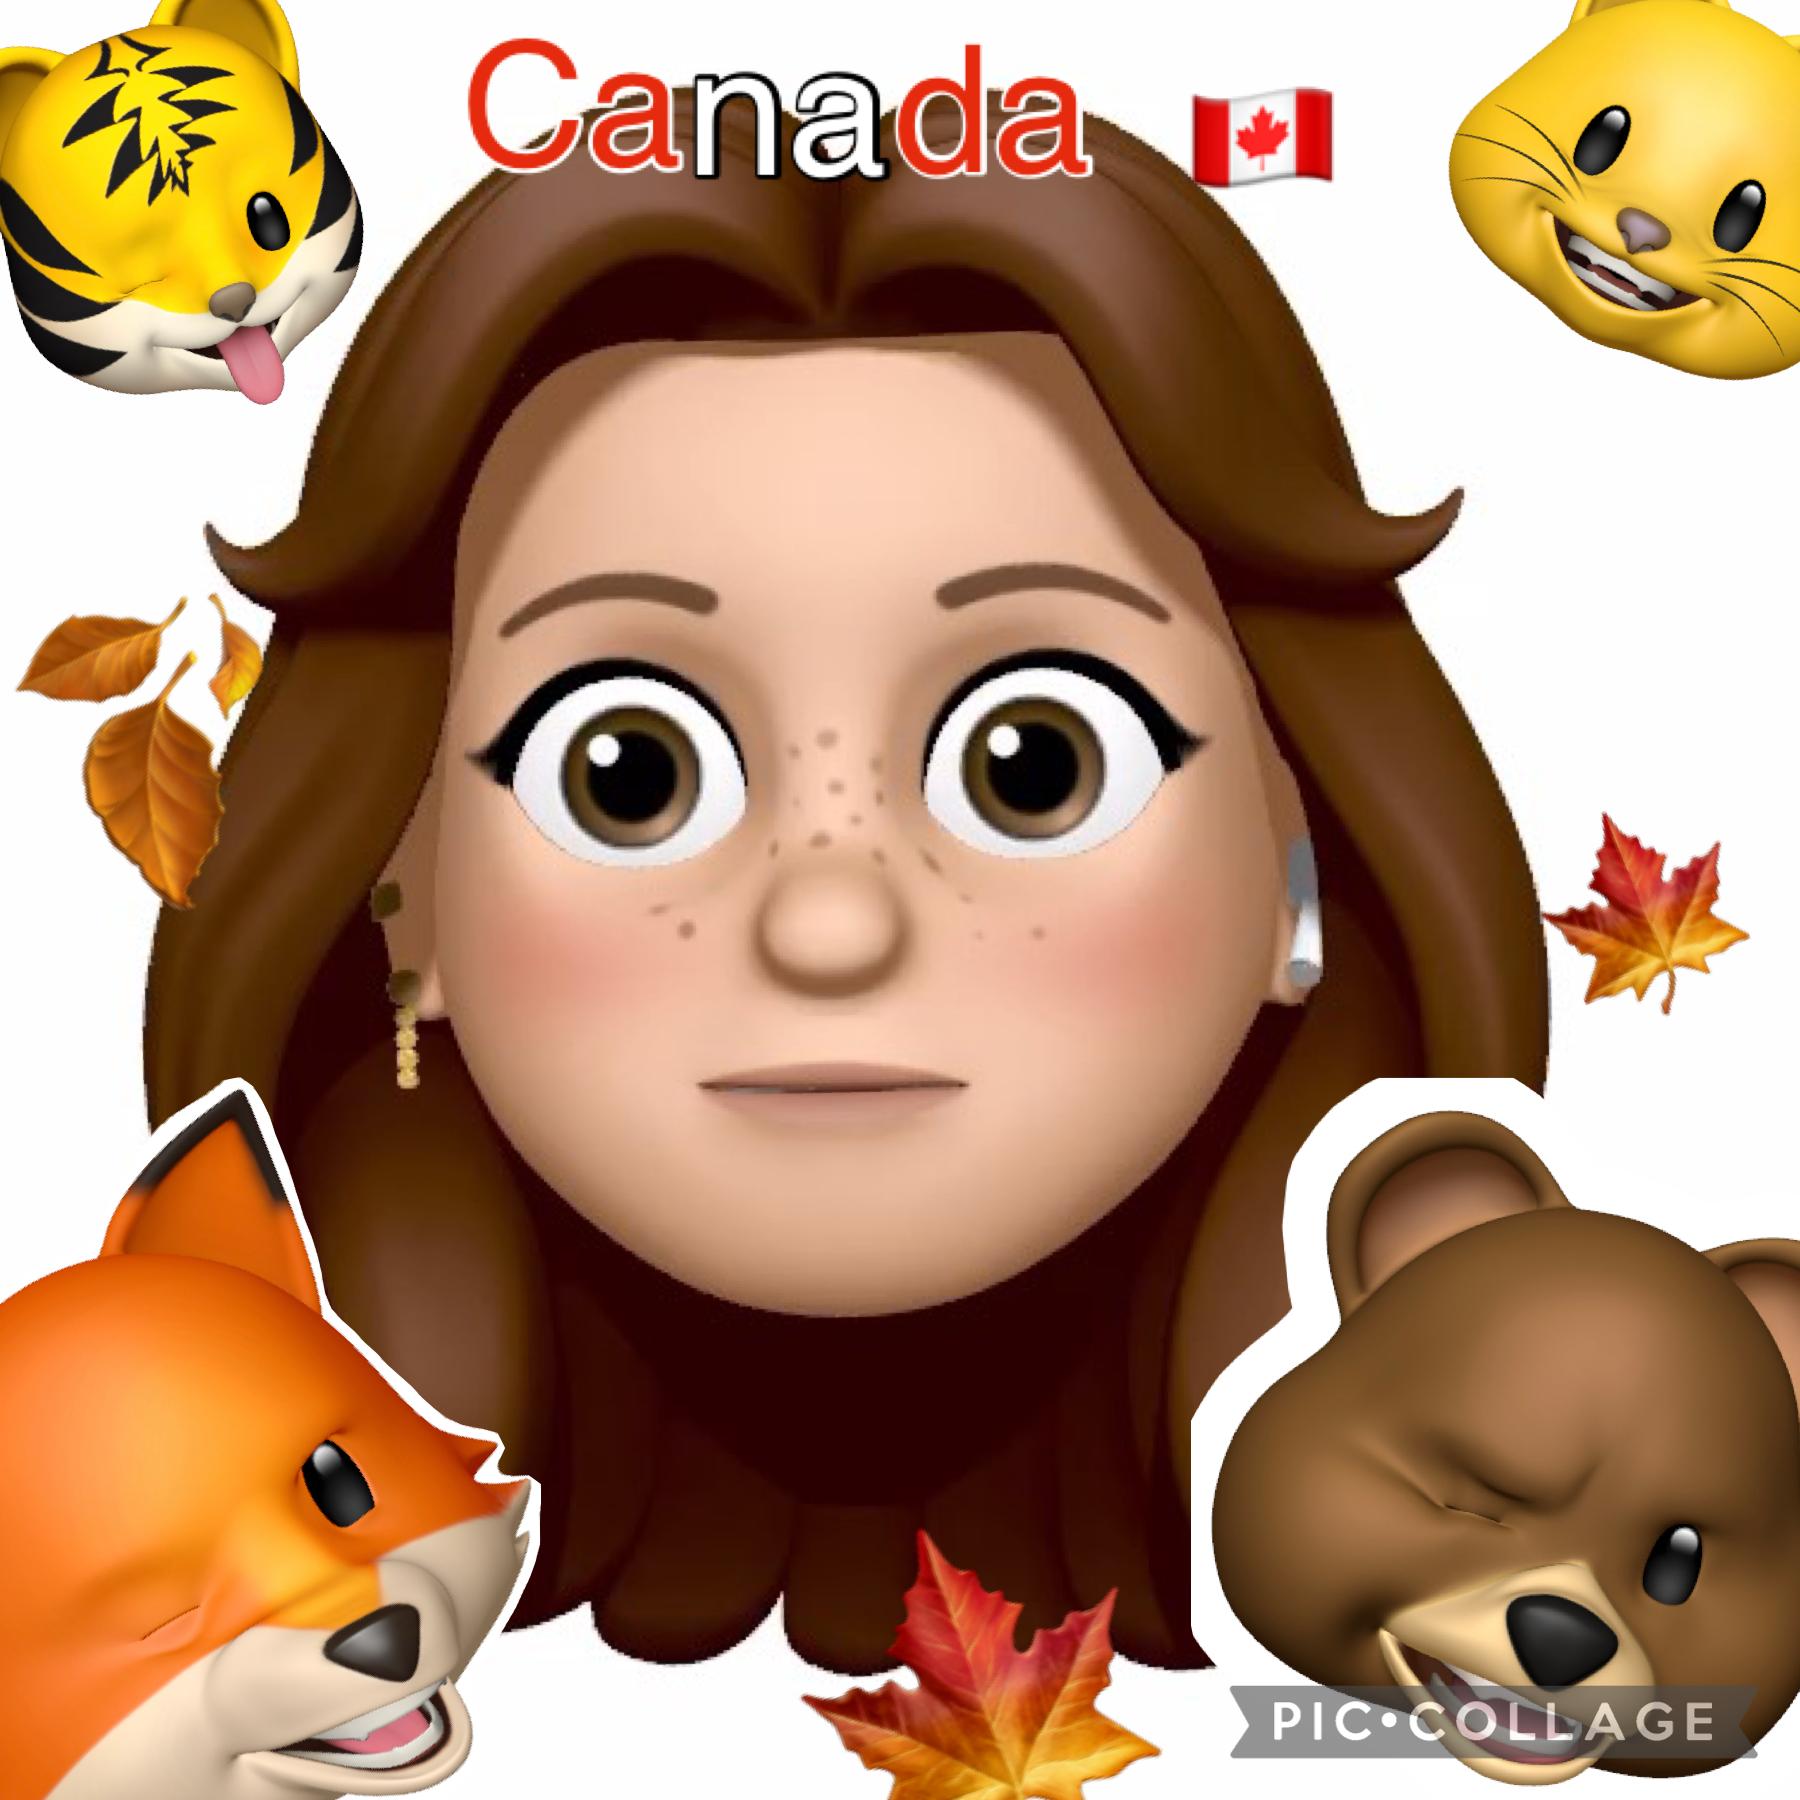 Going to Canada 🇨🇦 l
I am going to do a daily post and I am back!